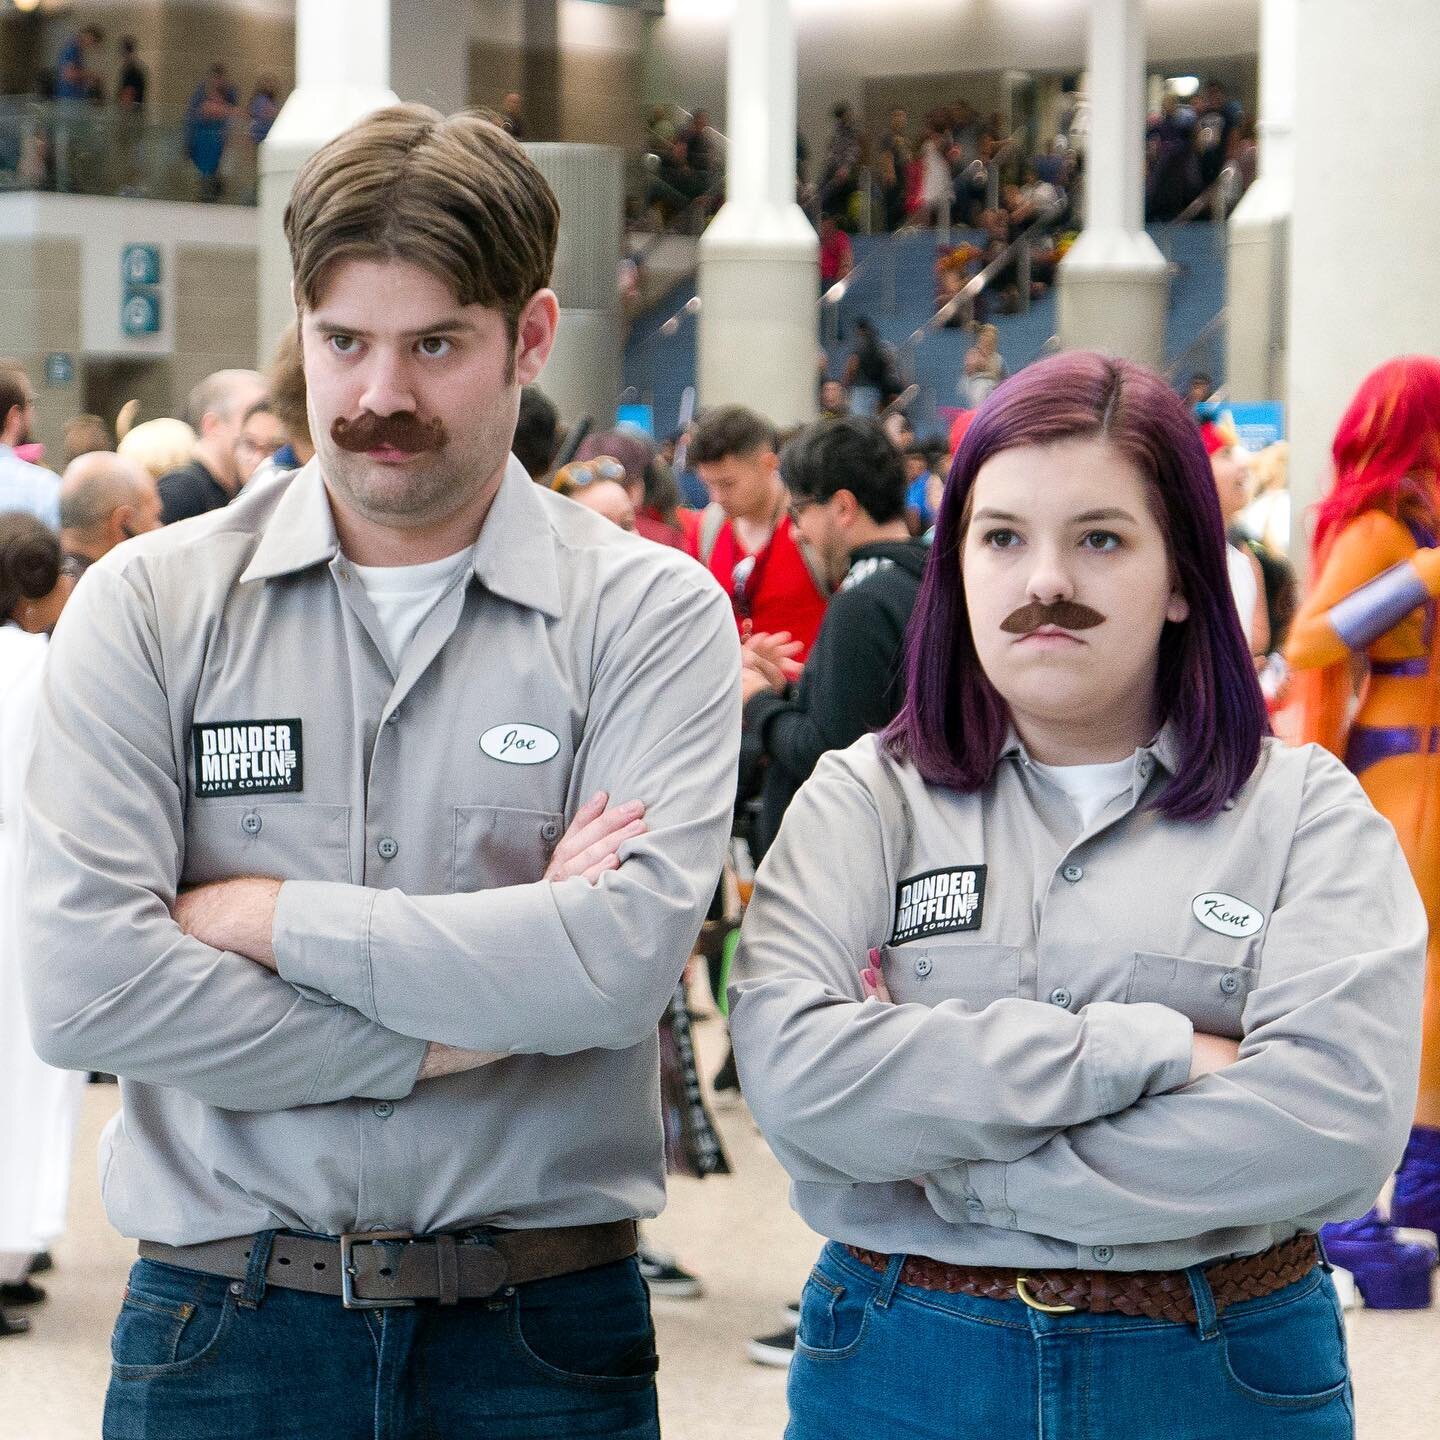 Find yourself a girl who'll do a couple's cosplay of Michael and Dwight in Warehouse uniforms and fake mustaches trying to prank the Utica branch. Happy anniversary, and here's to 6 more years of office references.